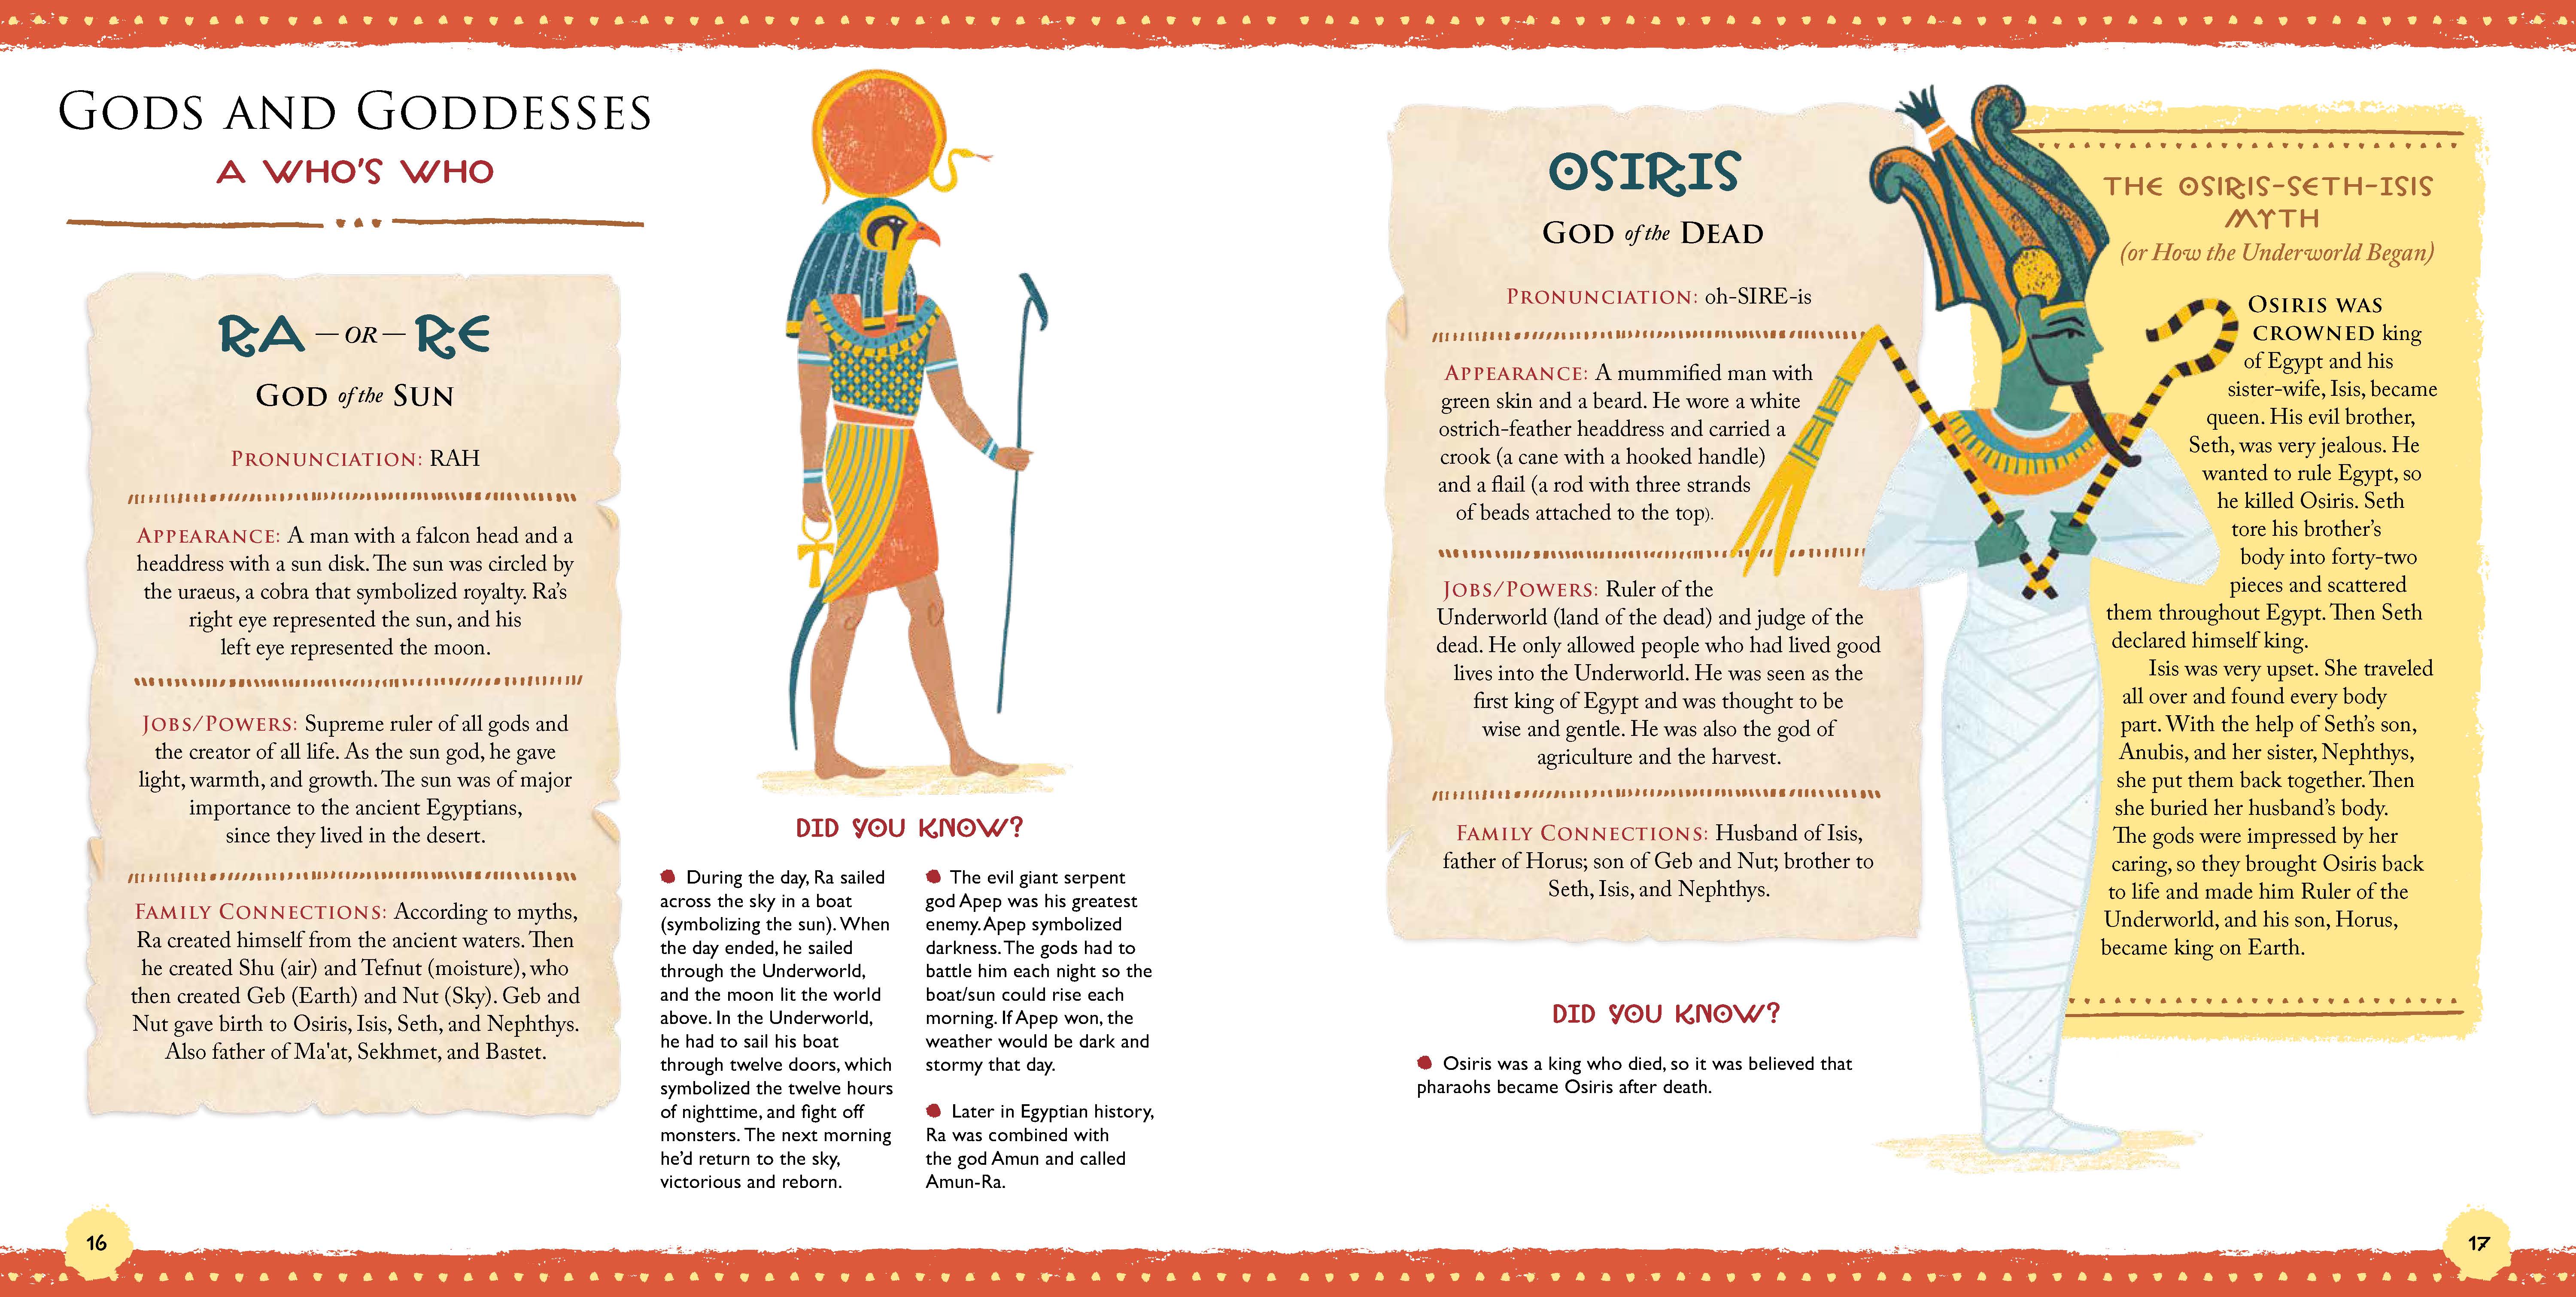 Sample Spread for A Child's Introduction to Egyptology